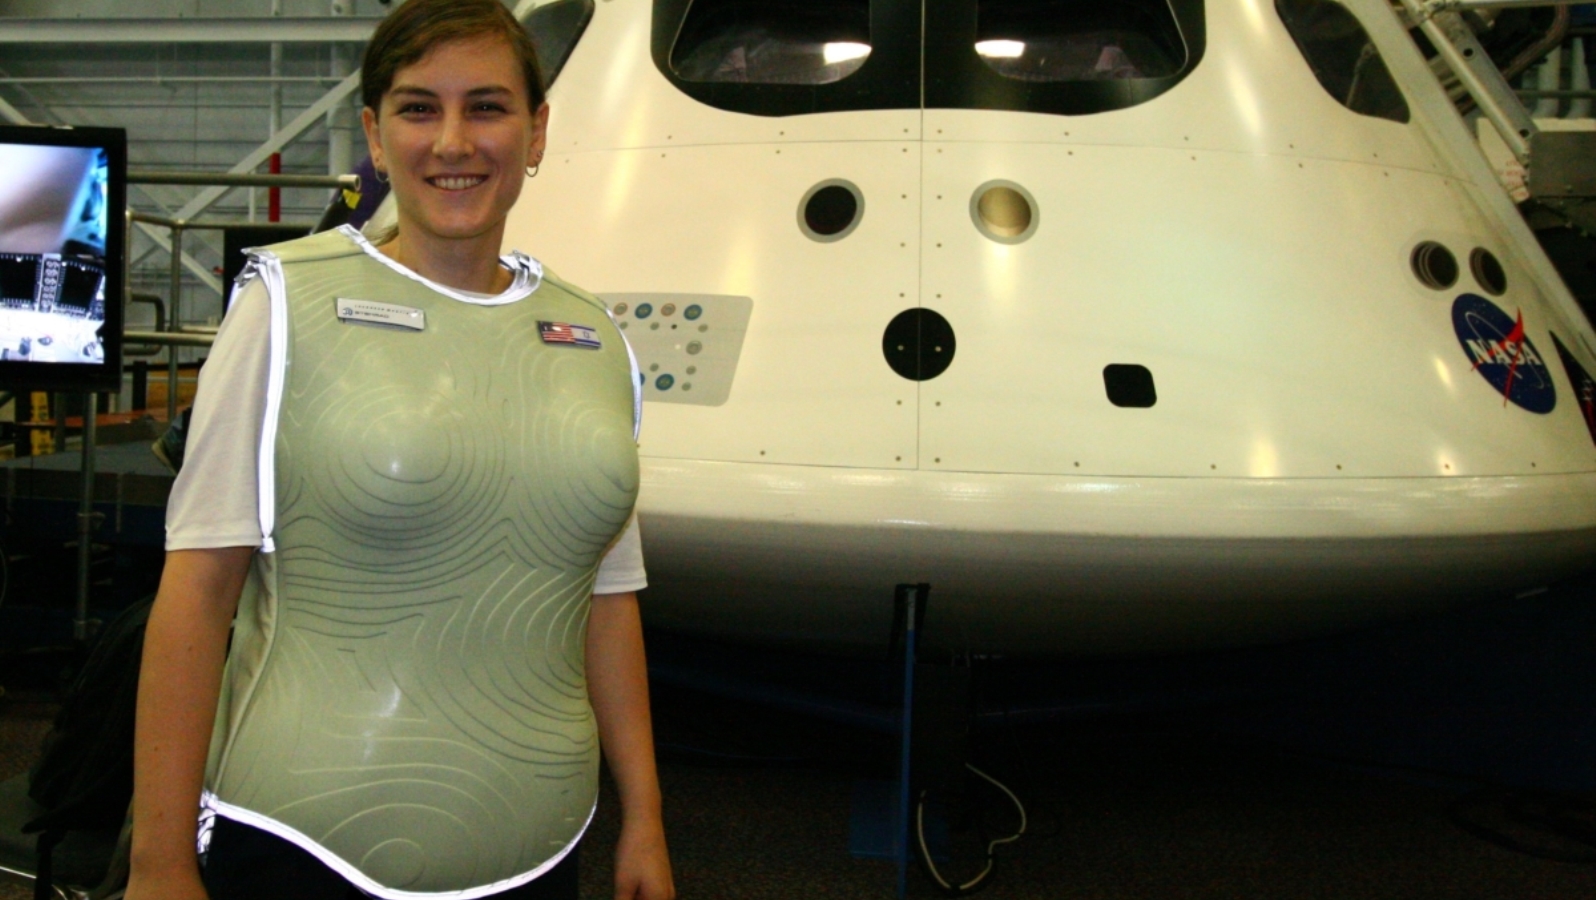 Dana Vaisler of StemRad wearing an AstroRad vest prototype in front of the Orion Capsule at Johnson Space Center in Houston. Photo: courtesy